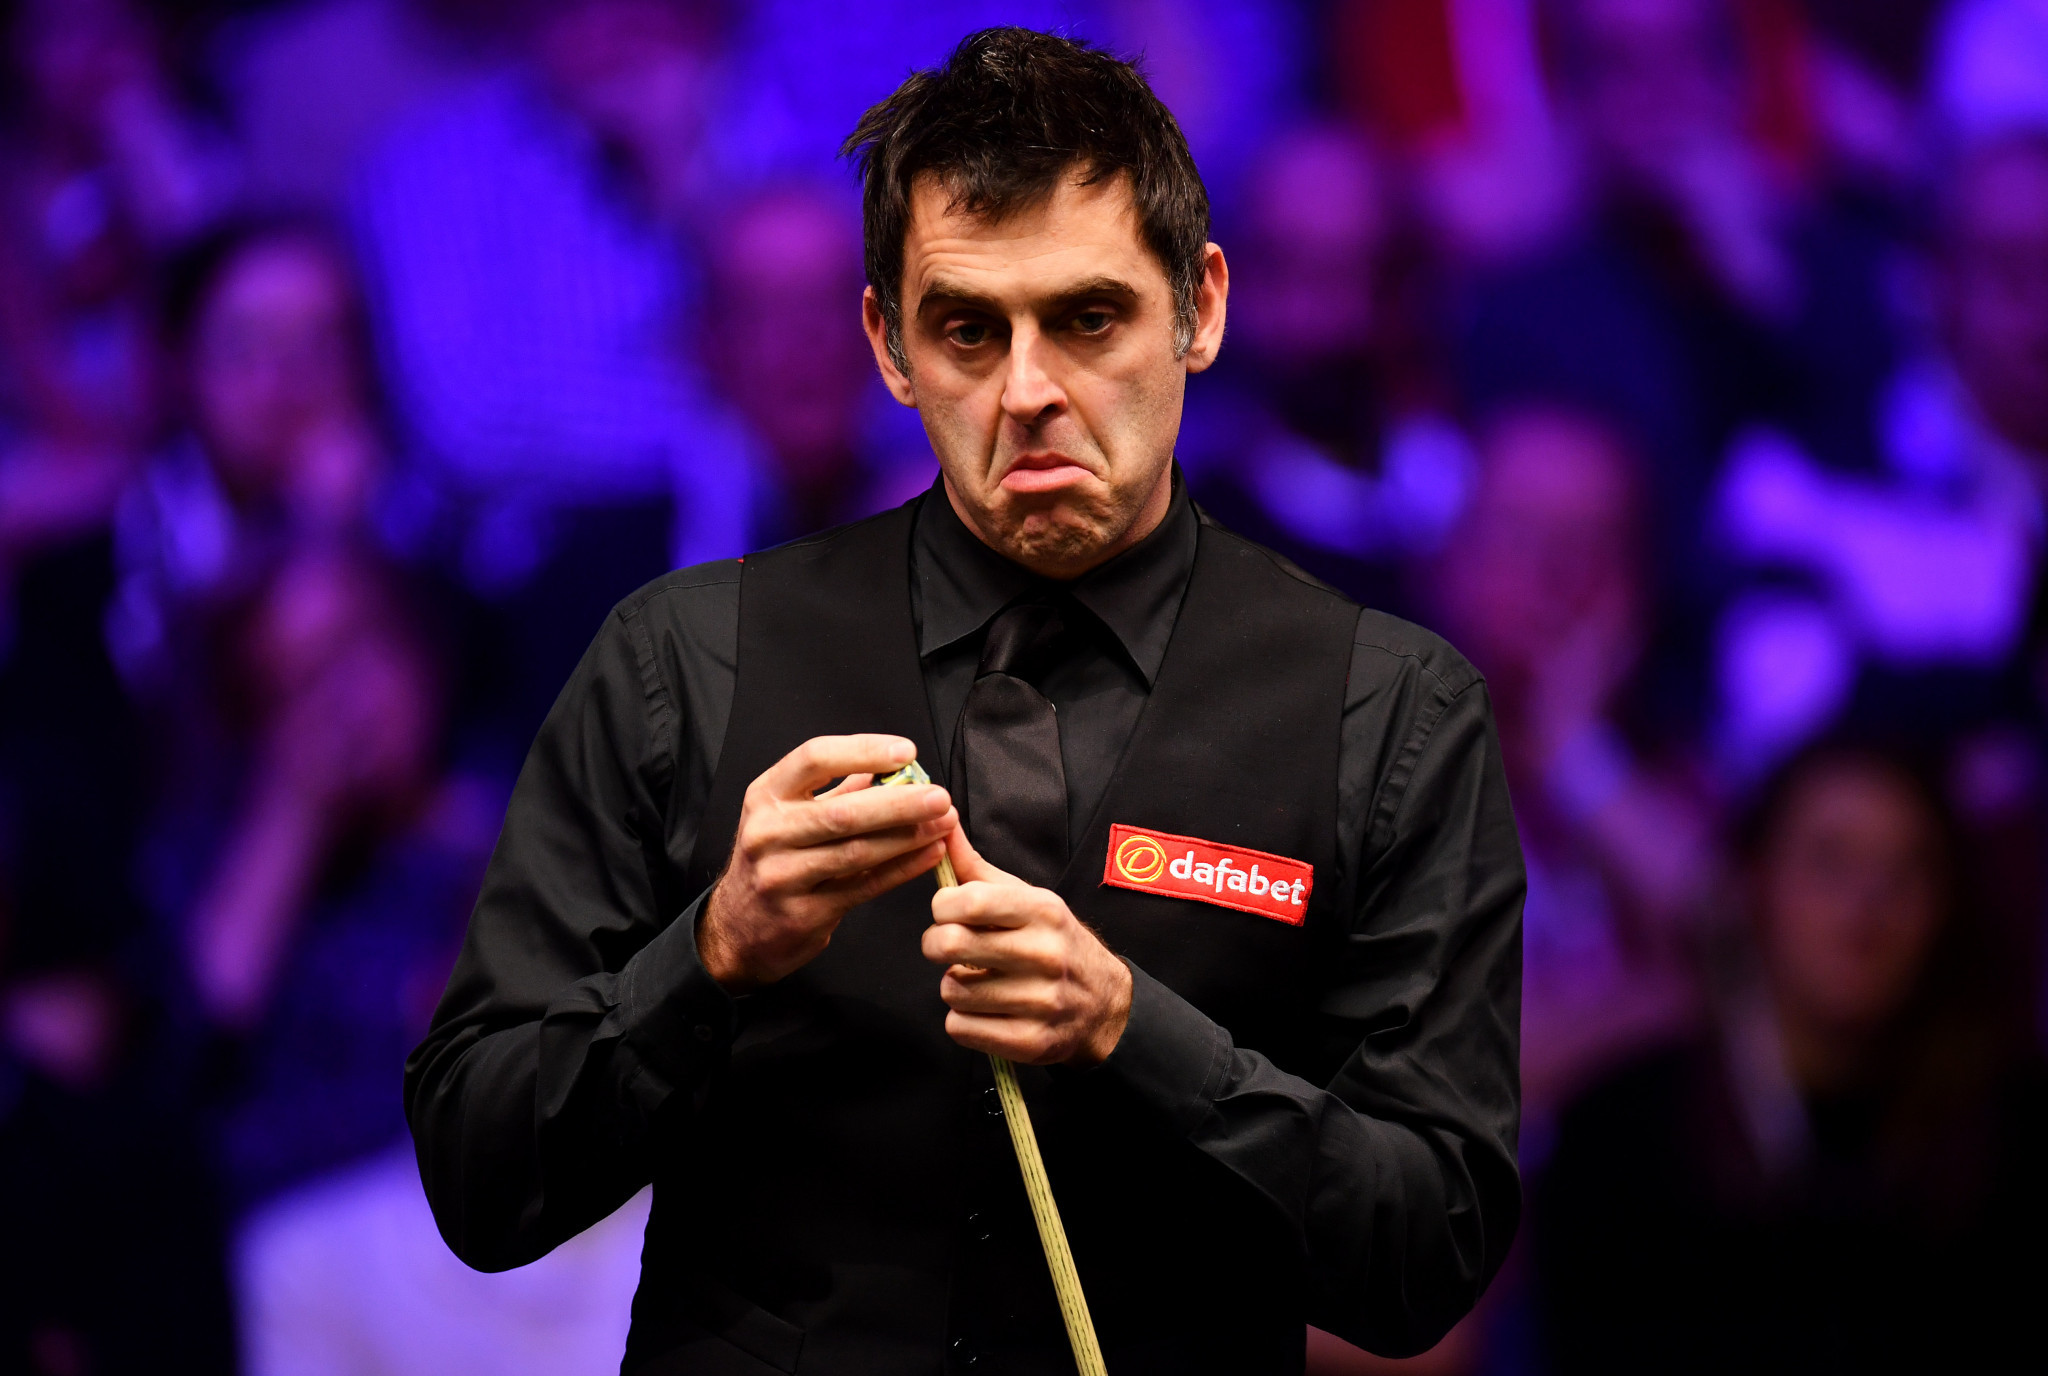 Five-time winner O’Sullivan eyeing victory at 2018 World Snooker Championships